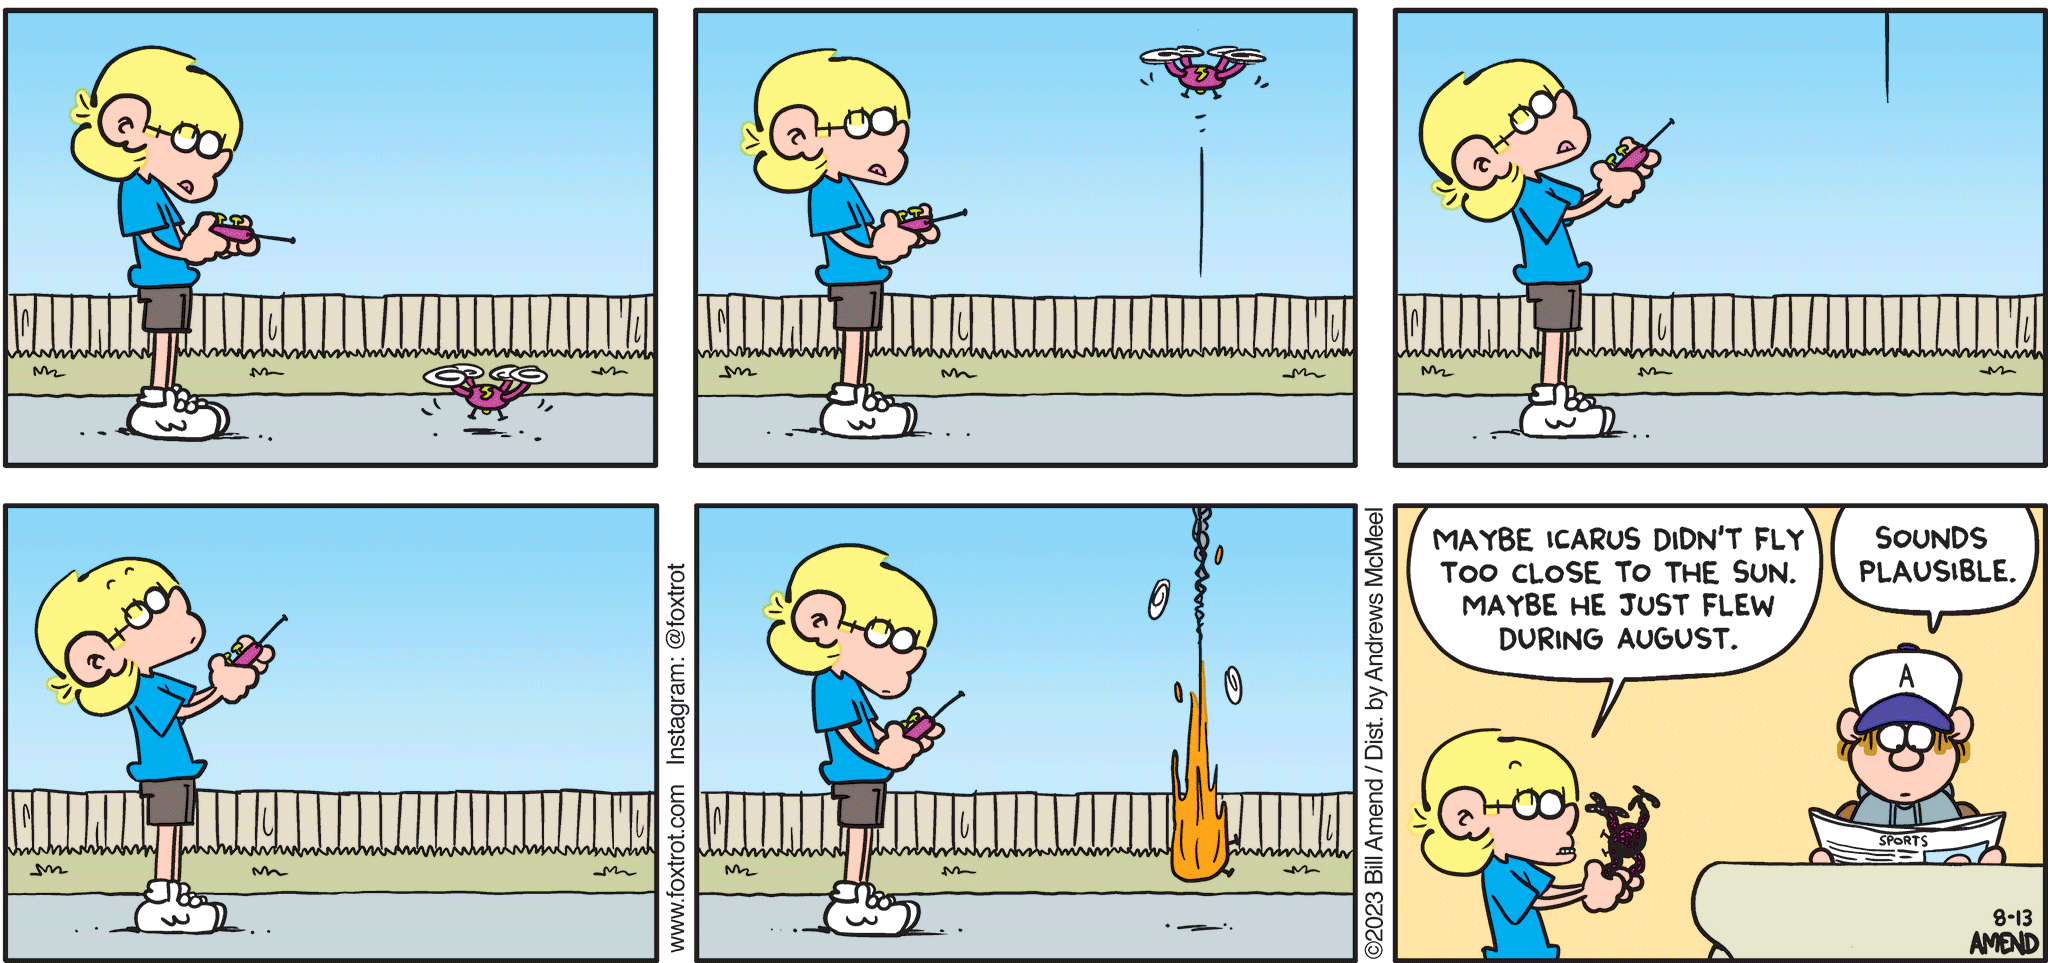 FoxTrot comic strip by Bill Amend - "Rising Temperatures" published August 13, 2023 - Transcript: Jason Fox: Maybe Icarus didn't fly too close to the sun. Maybe he just flew during August. Peter Fox: Sounds plausible.